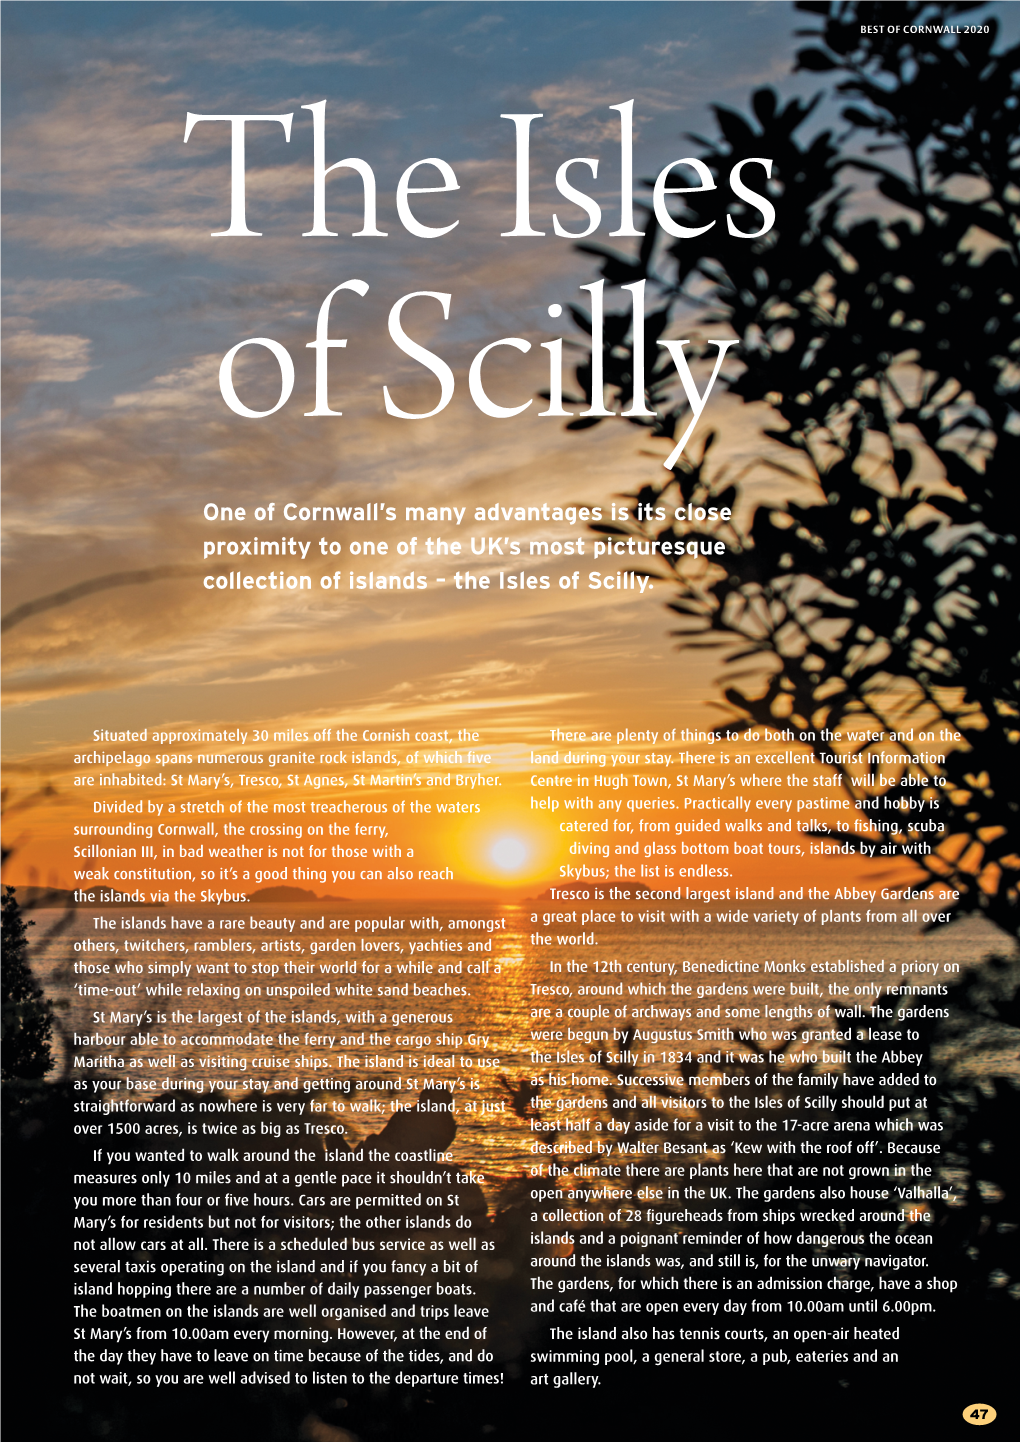 BEST of CORNWALL | and the ISLES of SCILLY